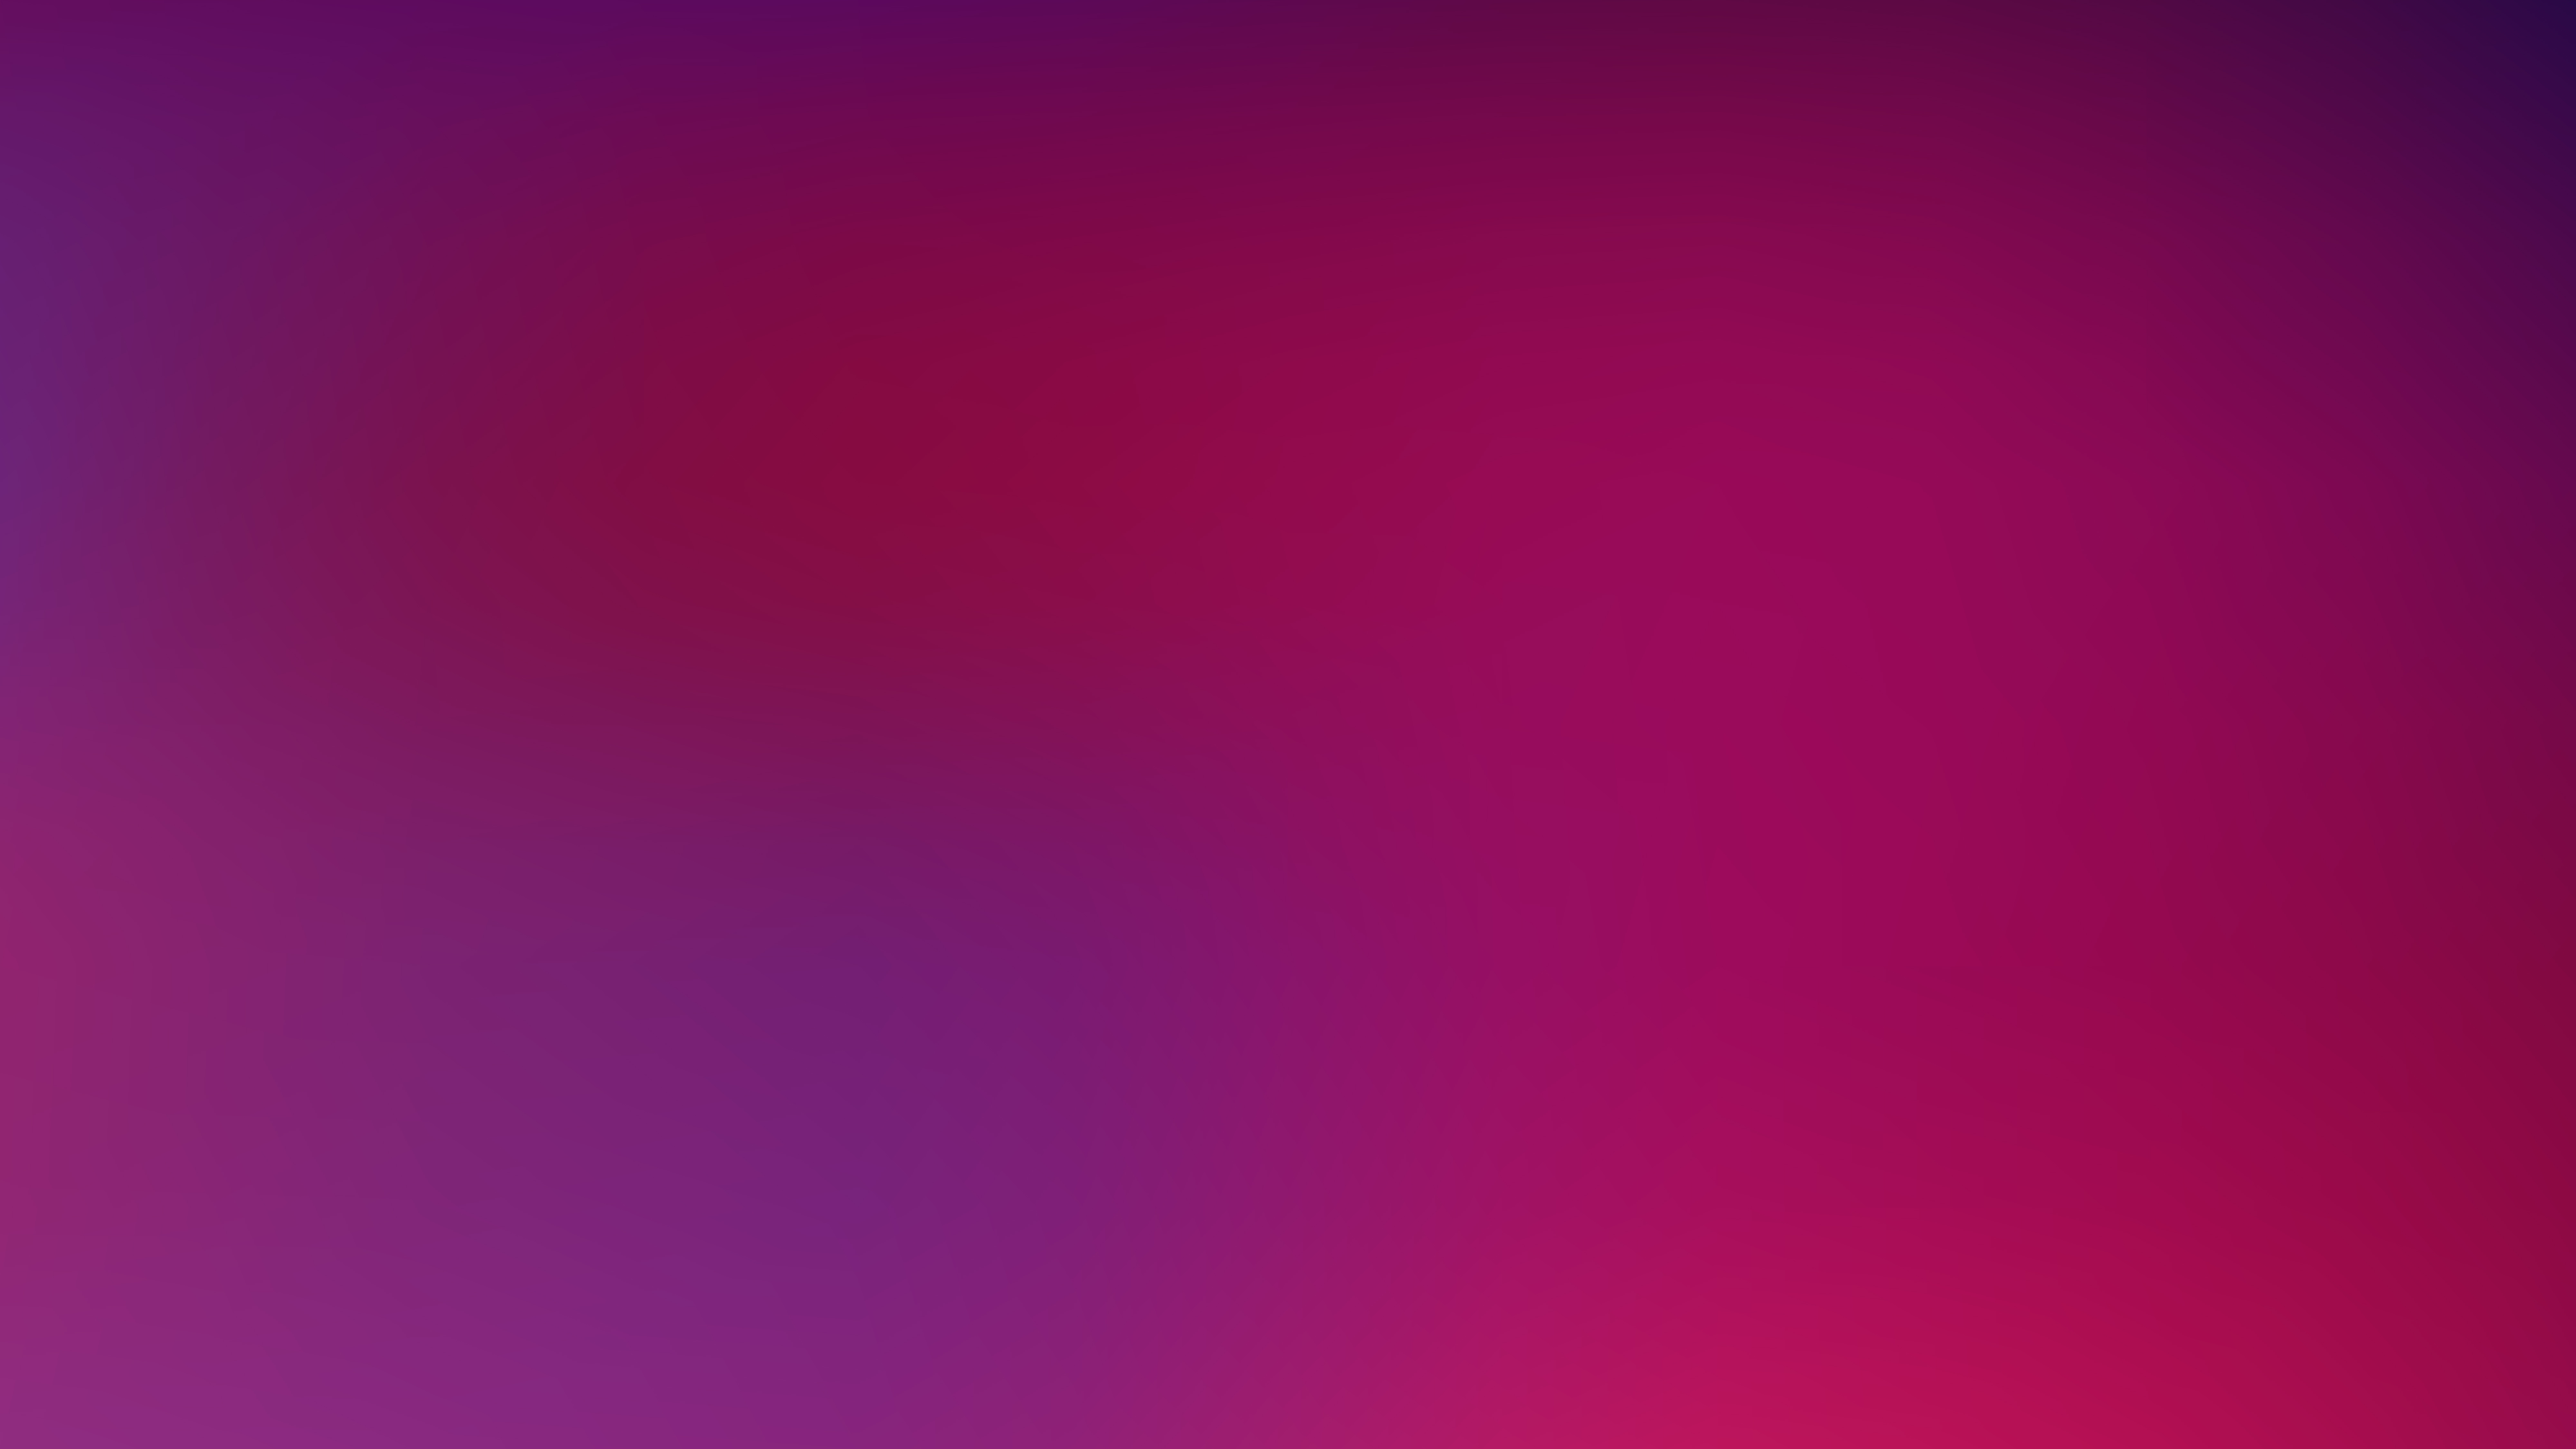 Free Red and Purple PPT Background